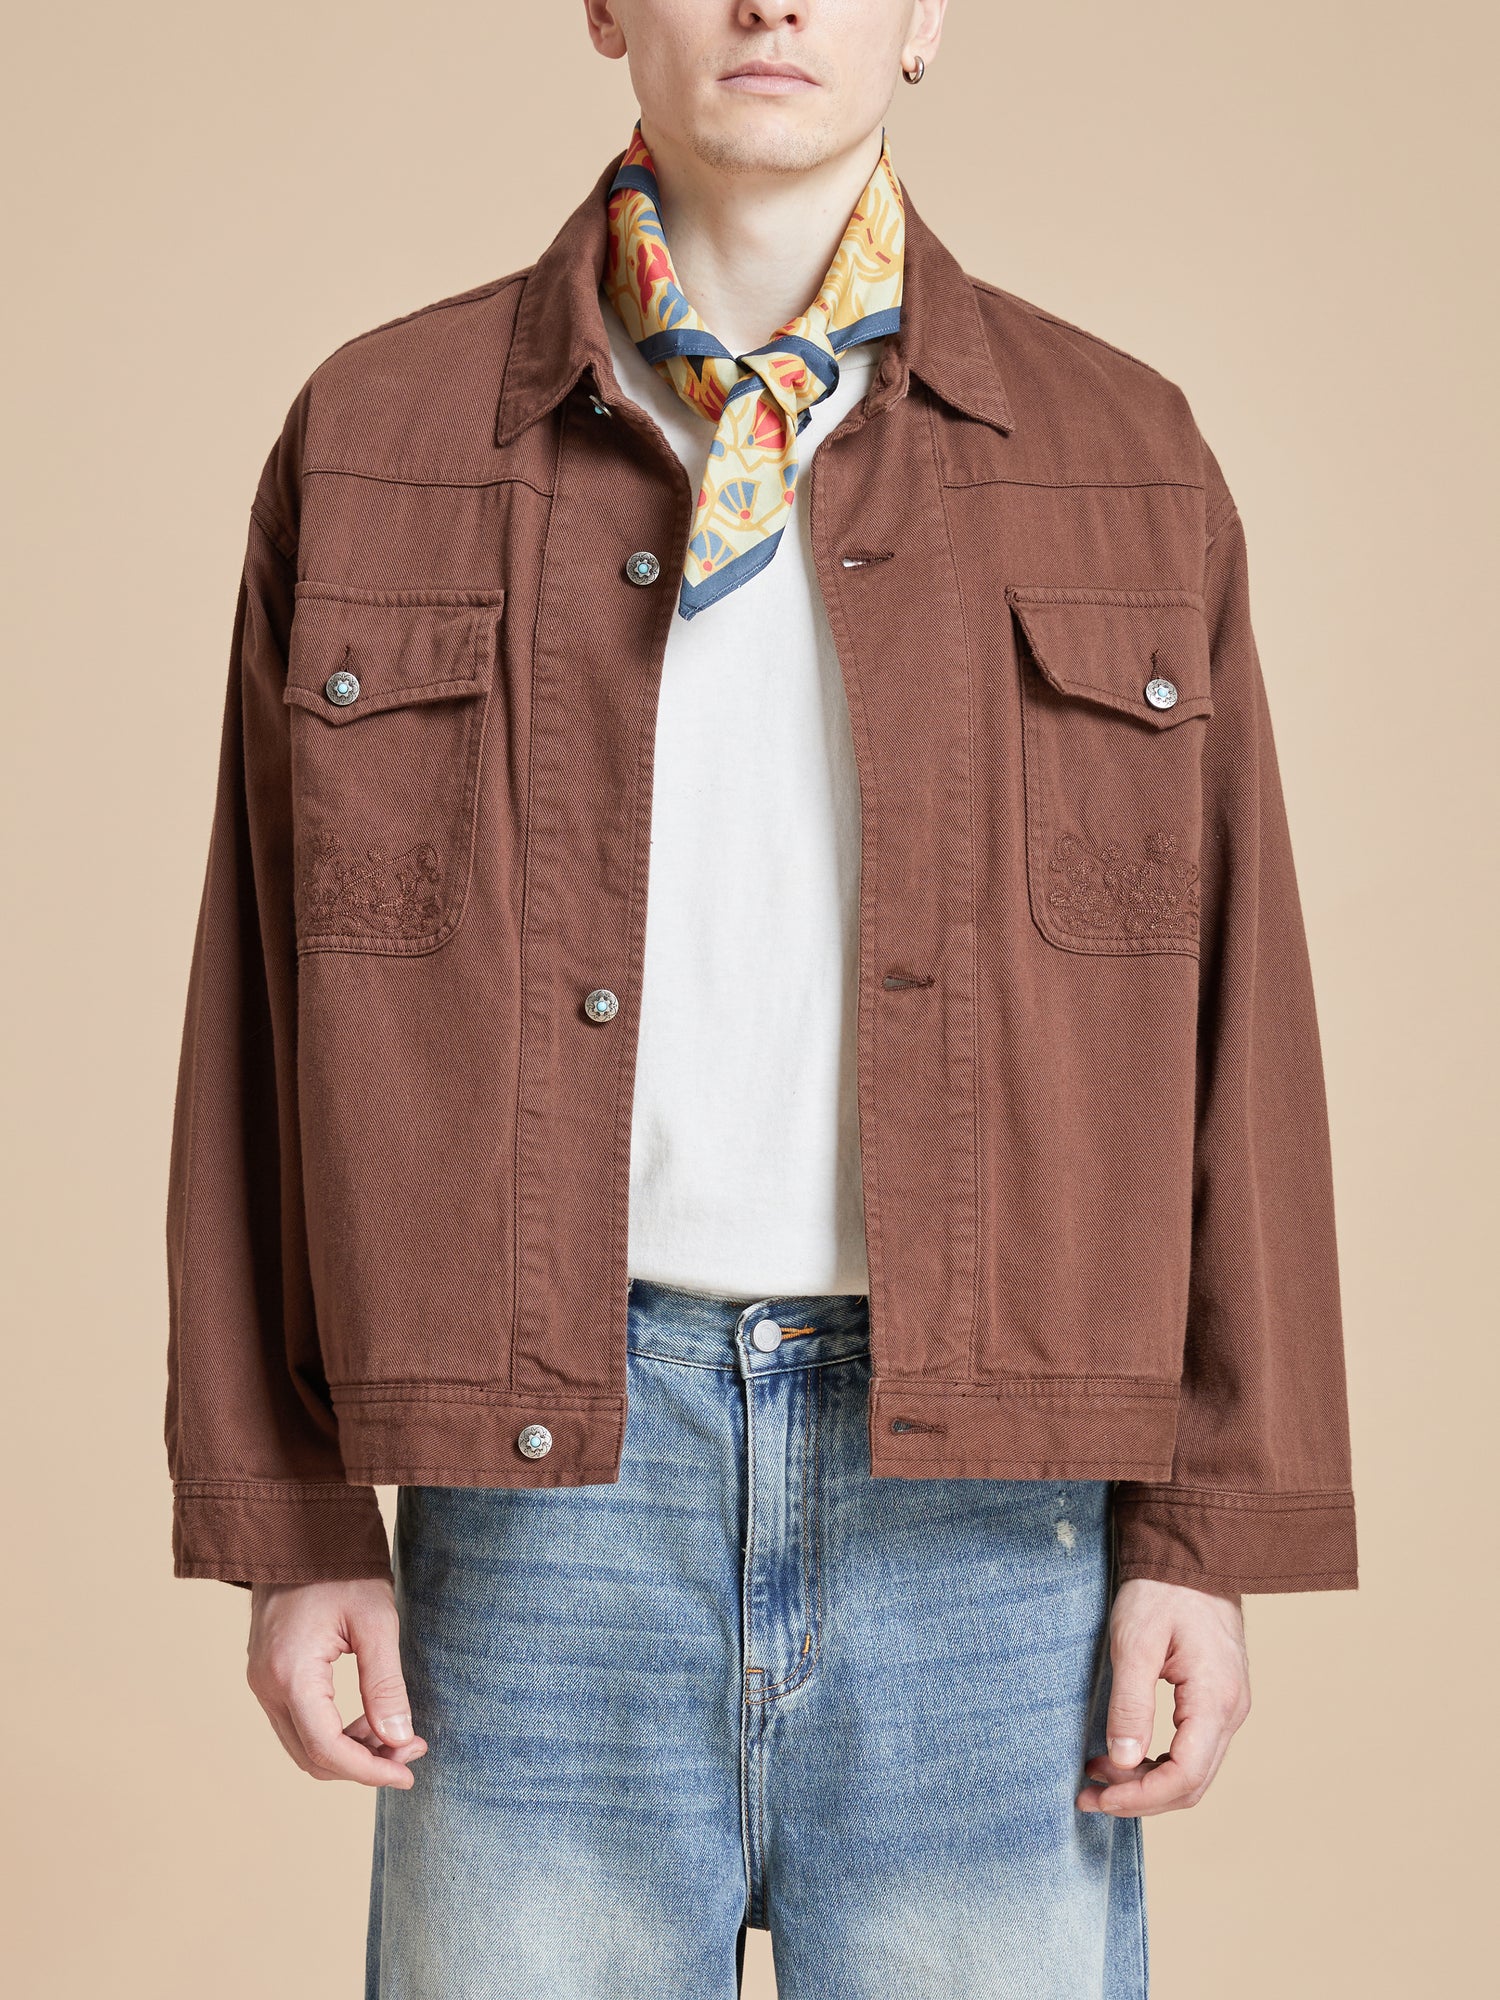 A man wearing a brown jacket and jeans, accessorized with the Coming Soon Rainforest Bandana by Found.